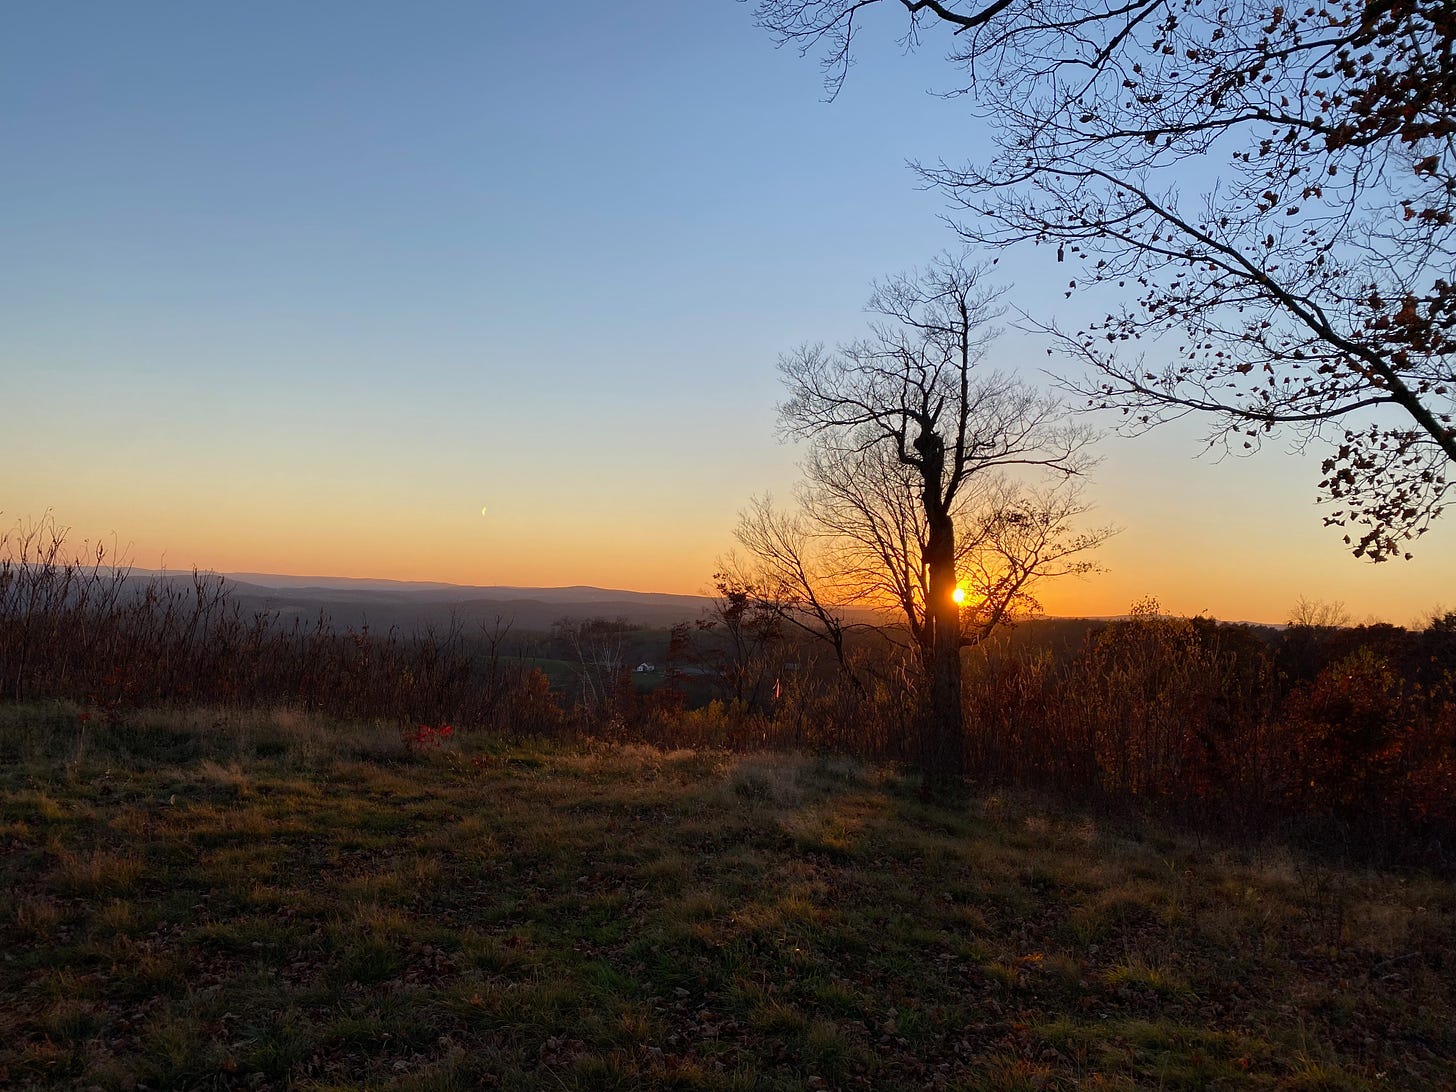 View from a hilltop looking out toward the sunset. The golden sun is positioned behind a tree with bare branches, silhouetted against the sky. The horizon is orange and golden, the sky above it clear and blue. Distant hills are visible, and the hilltop is dark, with brown grasses.